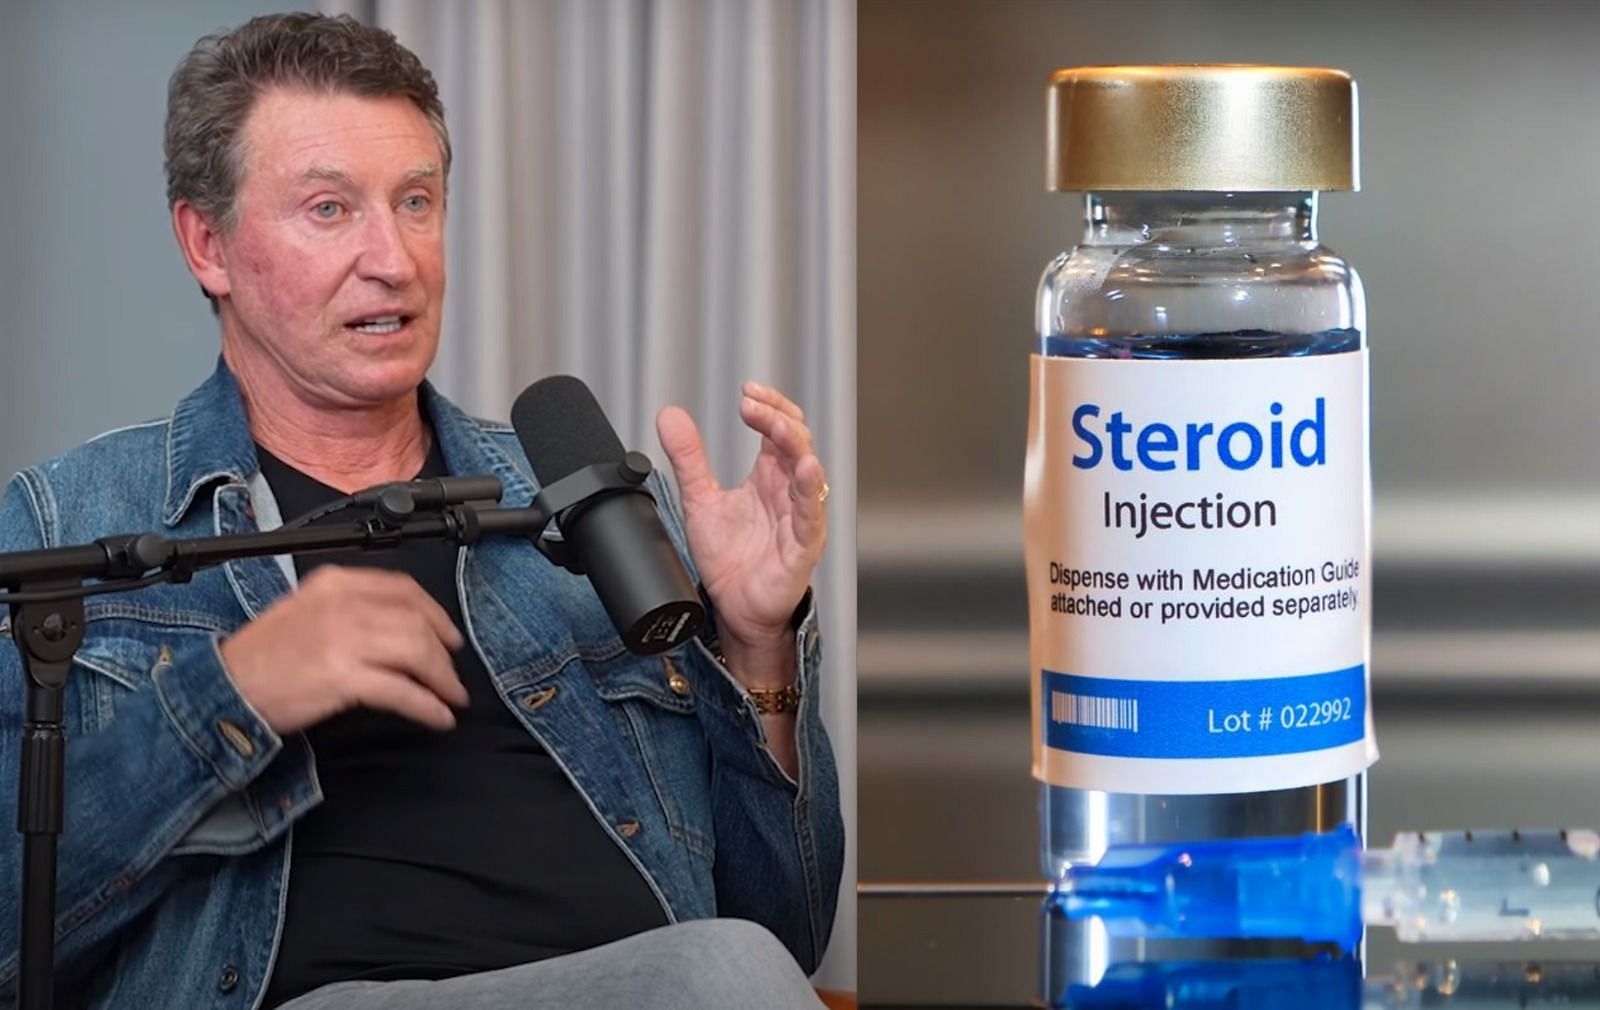 Wayne Gretzky admits using steroids to treat possible career-ending herniated thoracic disk injury in 1993 while playing for Los Angeles Kings